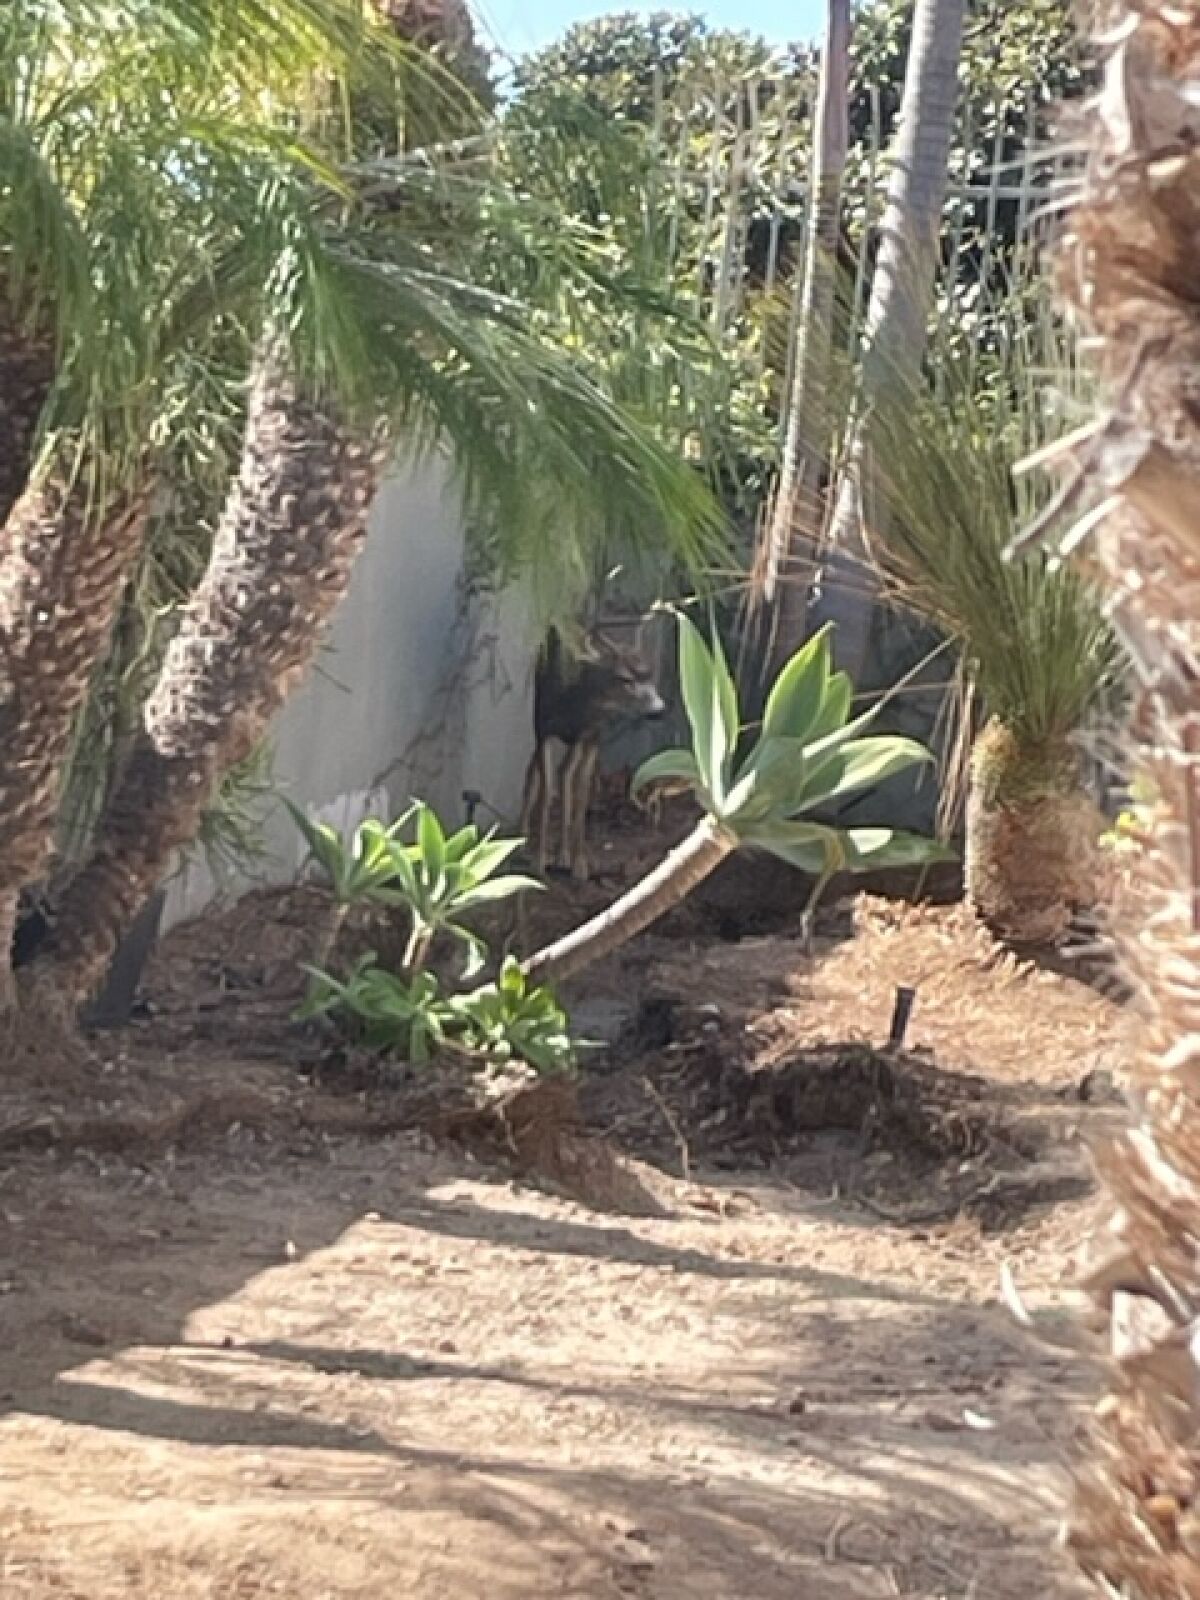 A deer rests in the backyard of an Emerald Bay home. The deer was first spotted offshore at Aliso Beach on Sunday morning.